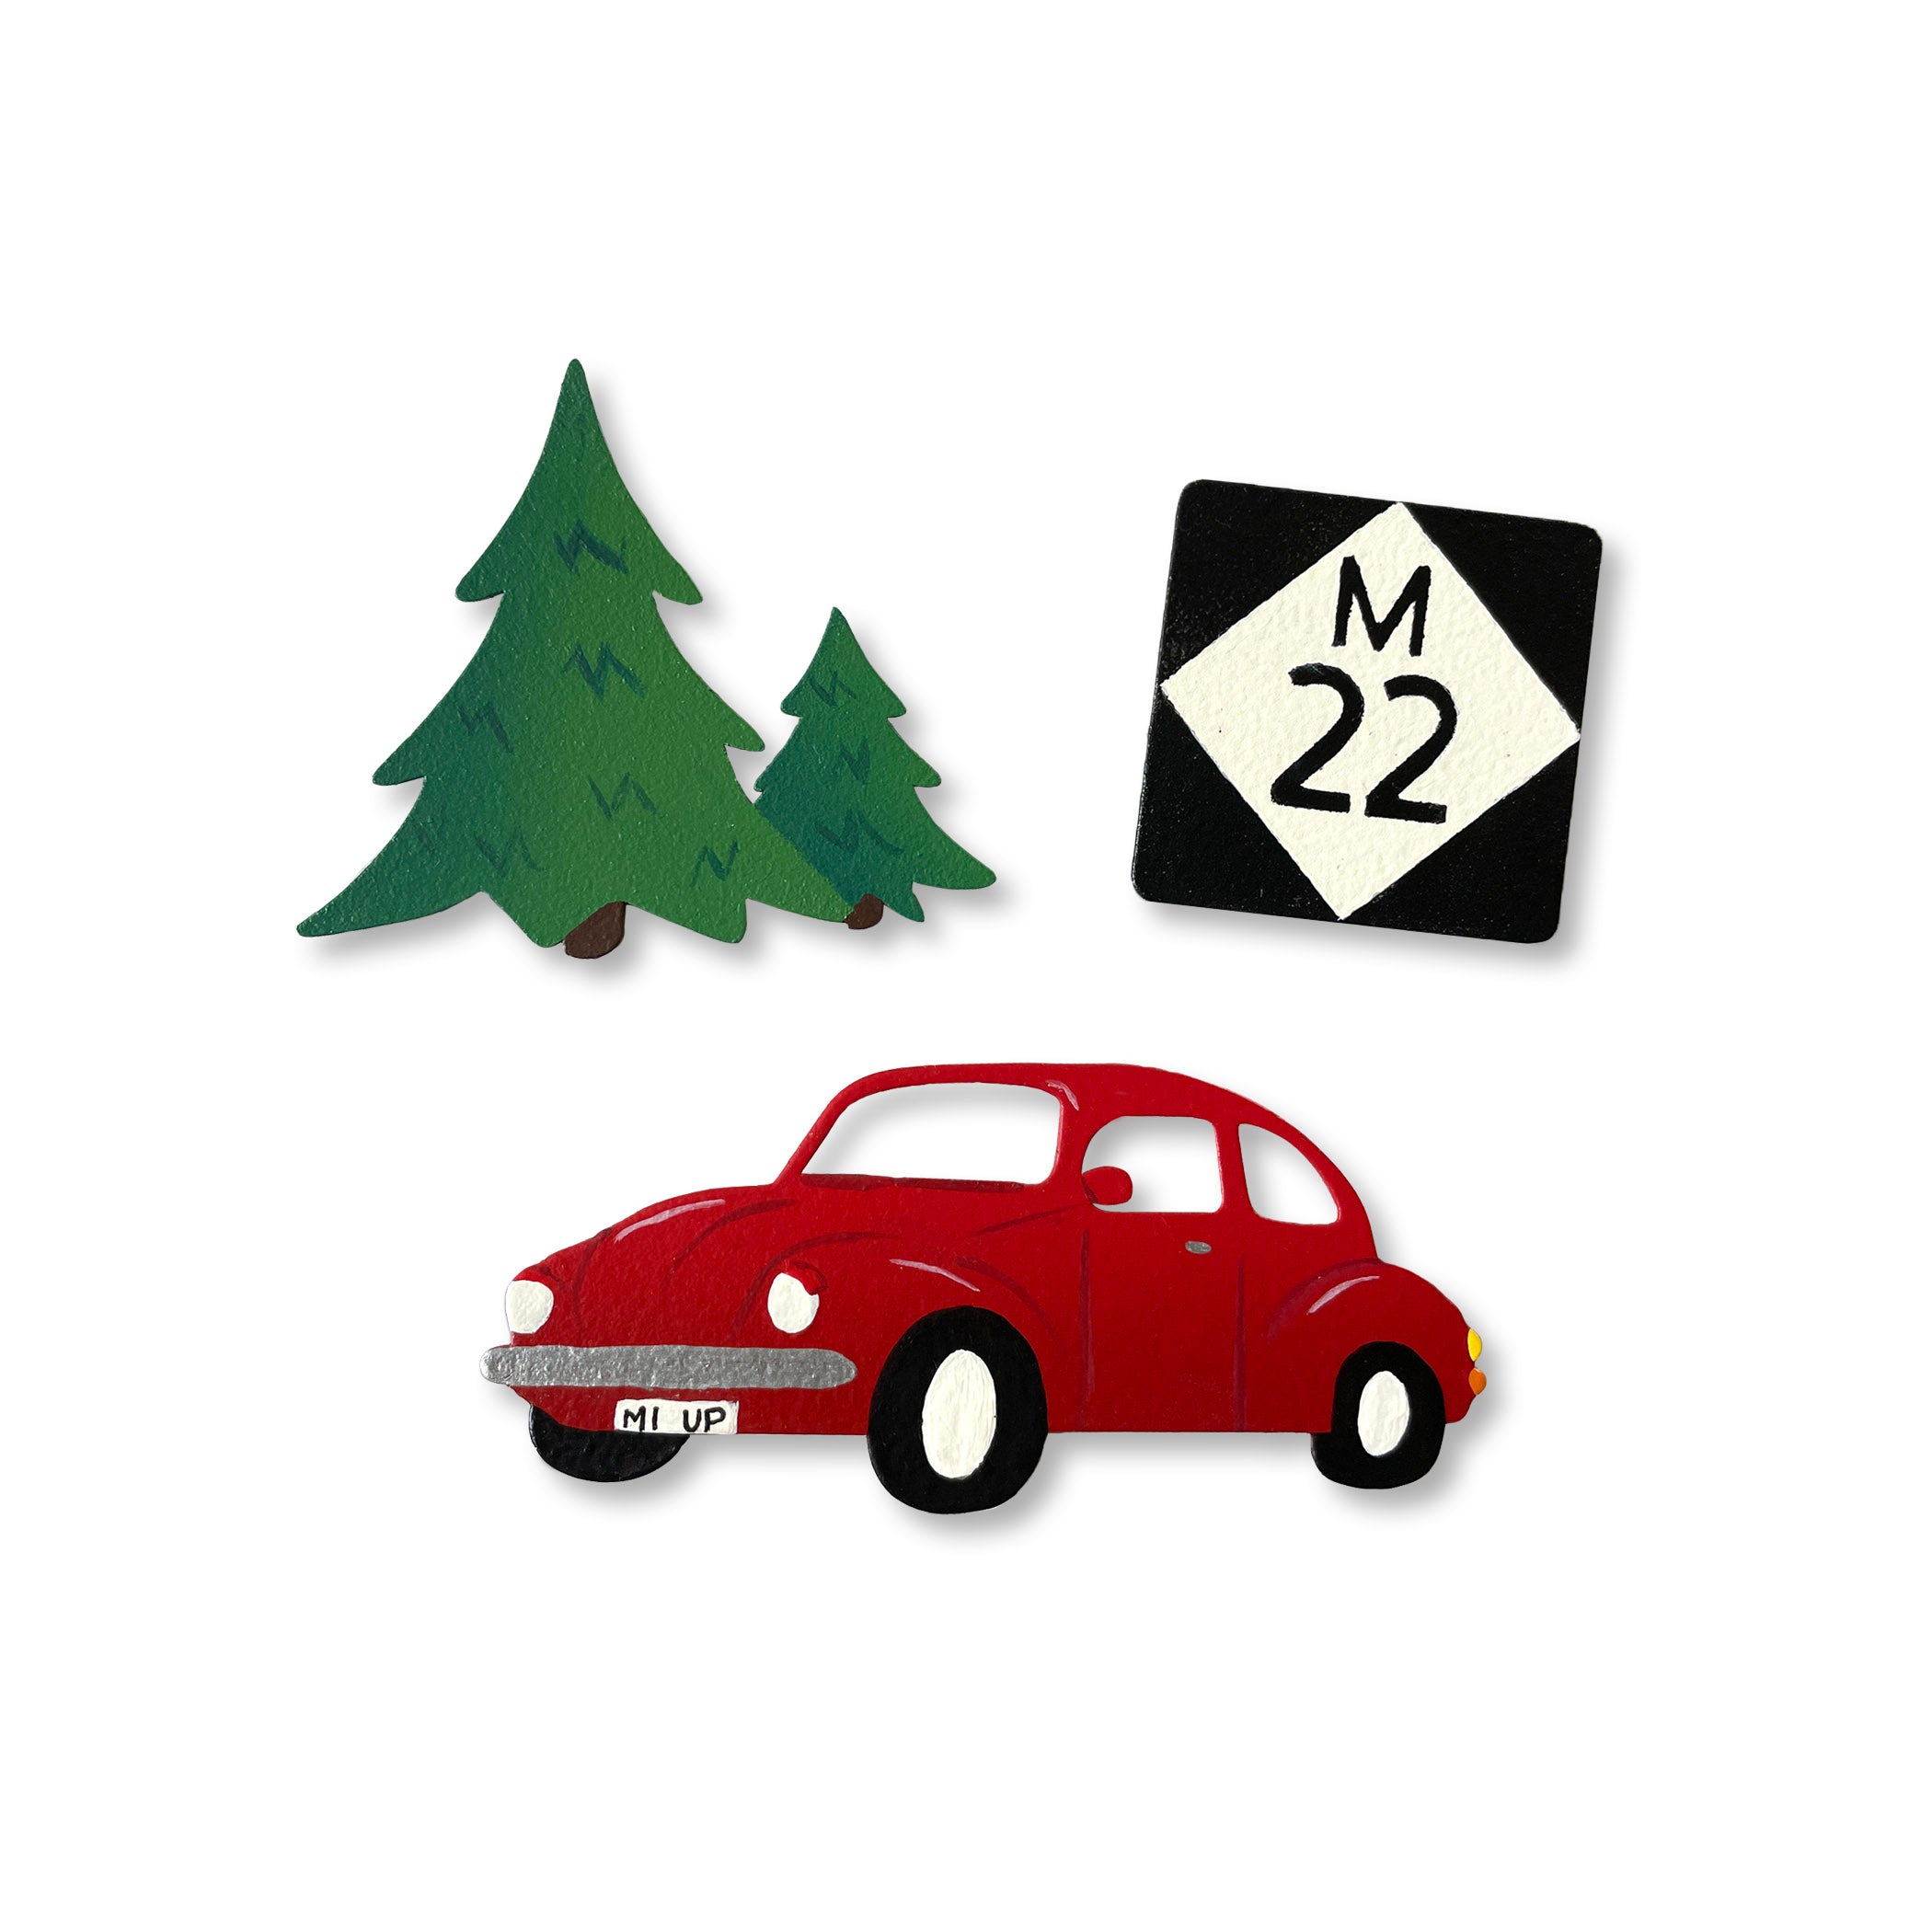 M-22 Scenic Drive Magnets S/3